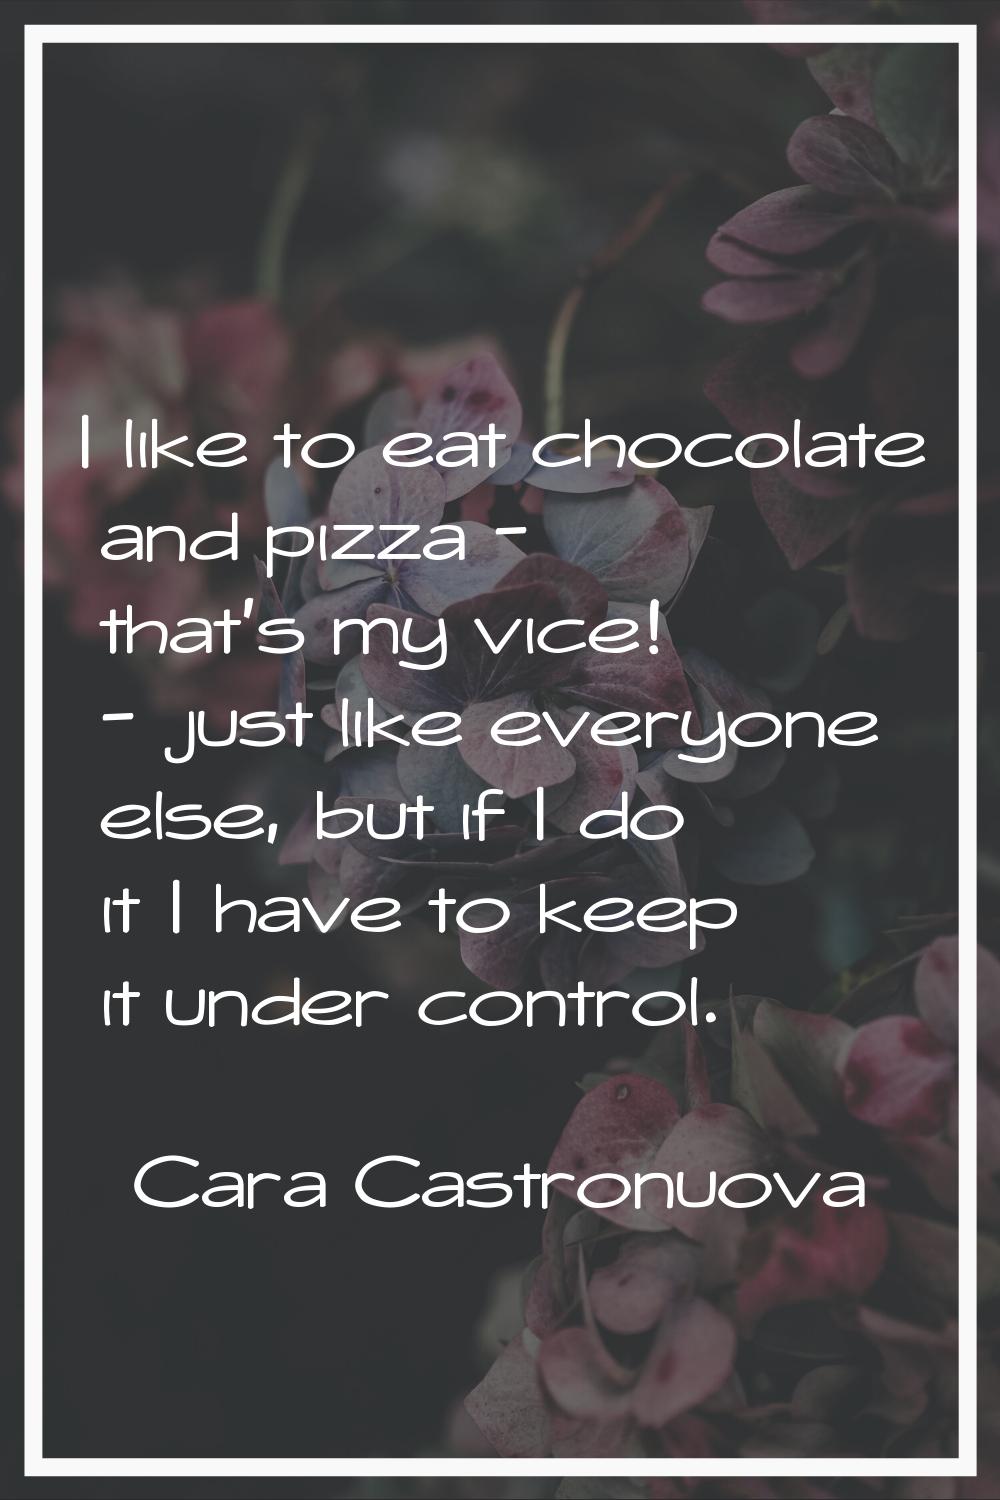 I like to eat chocolate and pizza - that's my vice! - just like everyone else, but if I do it I hav